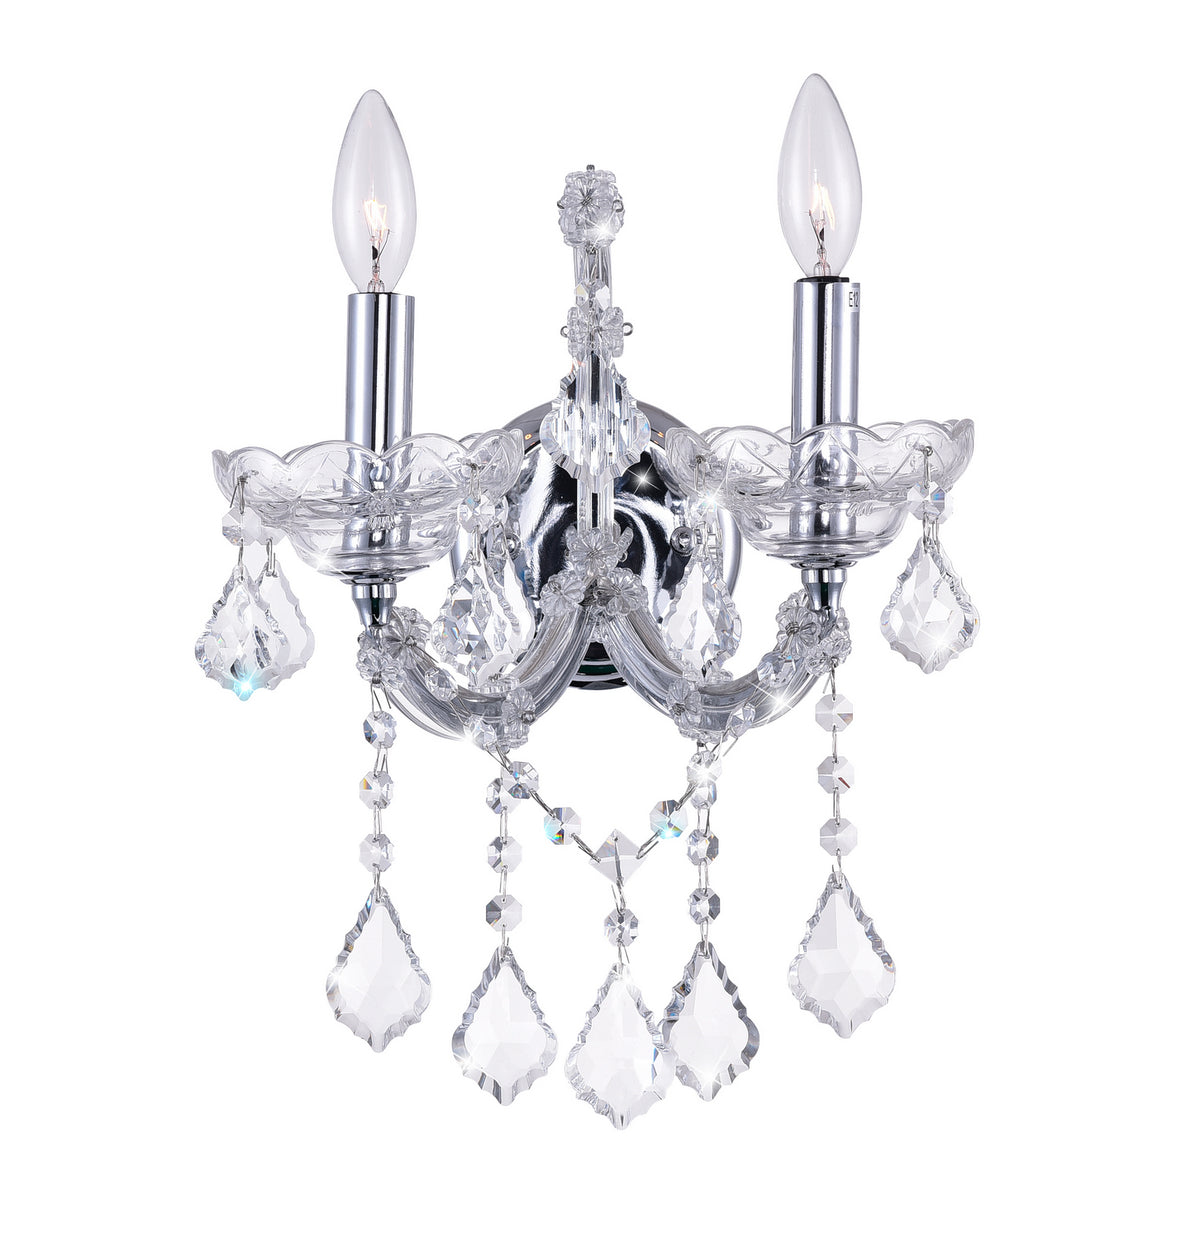 CWI Lighting - 8397W12C-2(Clear) - Two Light Wall Sconce - Maria Theresa - Chrome